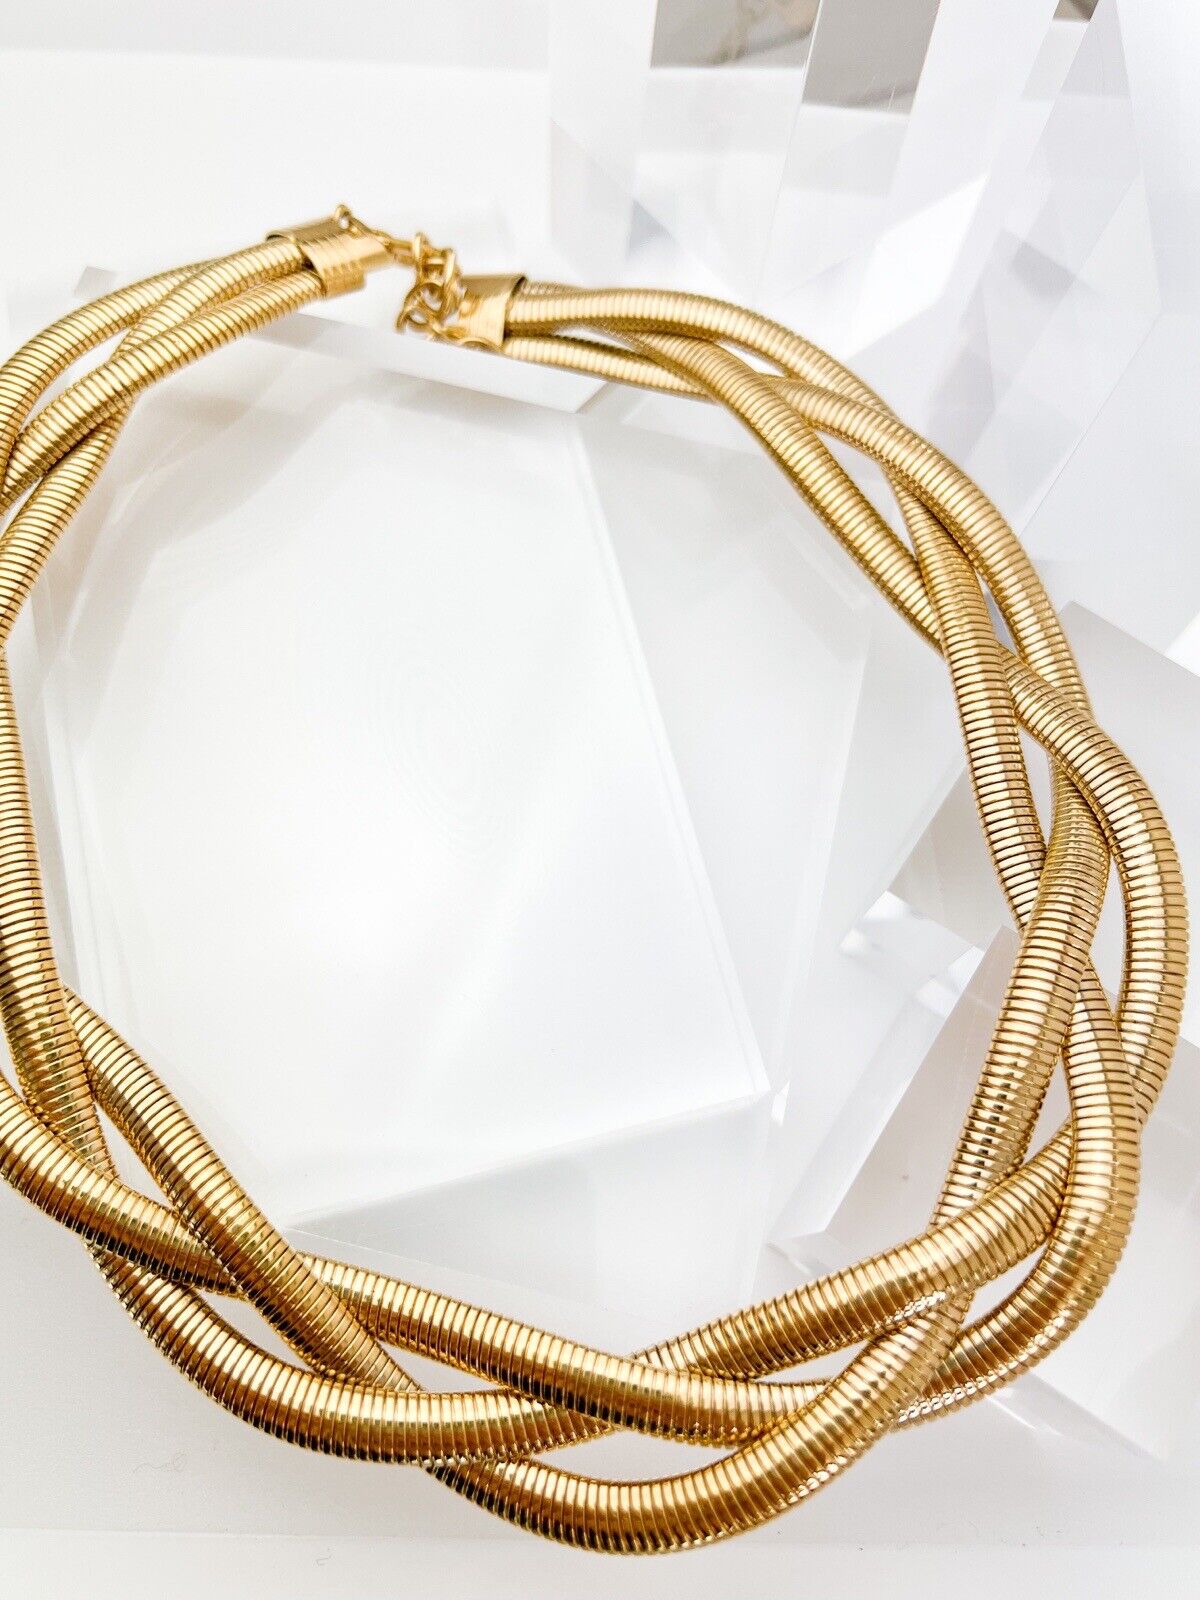 Givenchy Vintage Choker Necklace Chain Gold